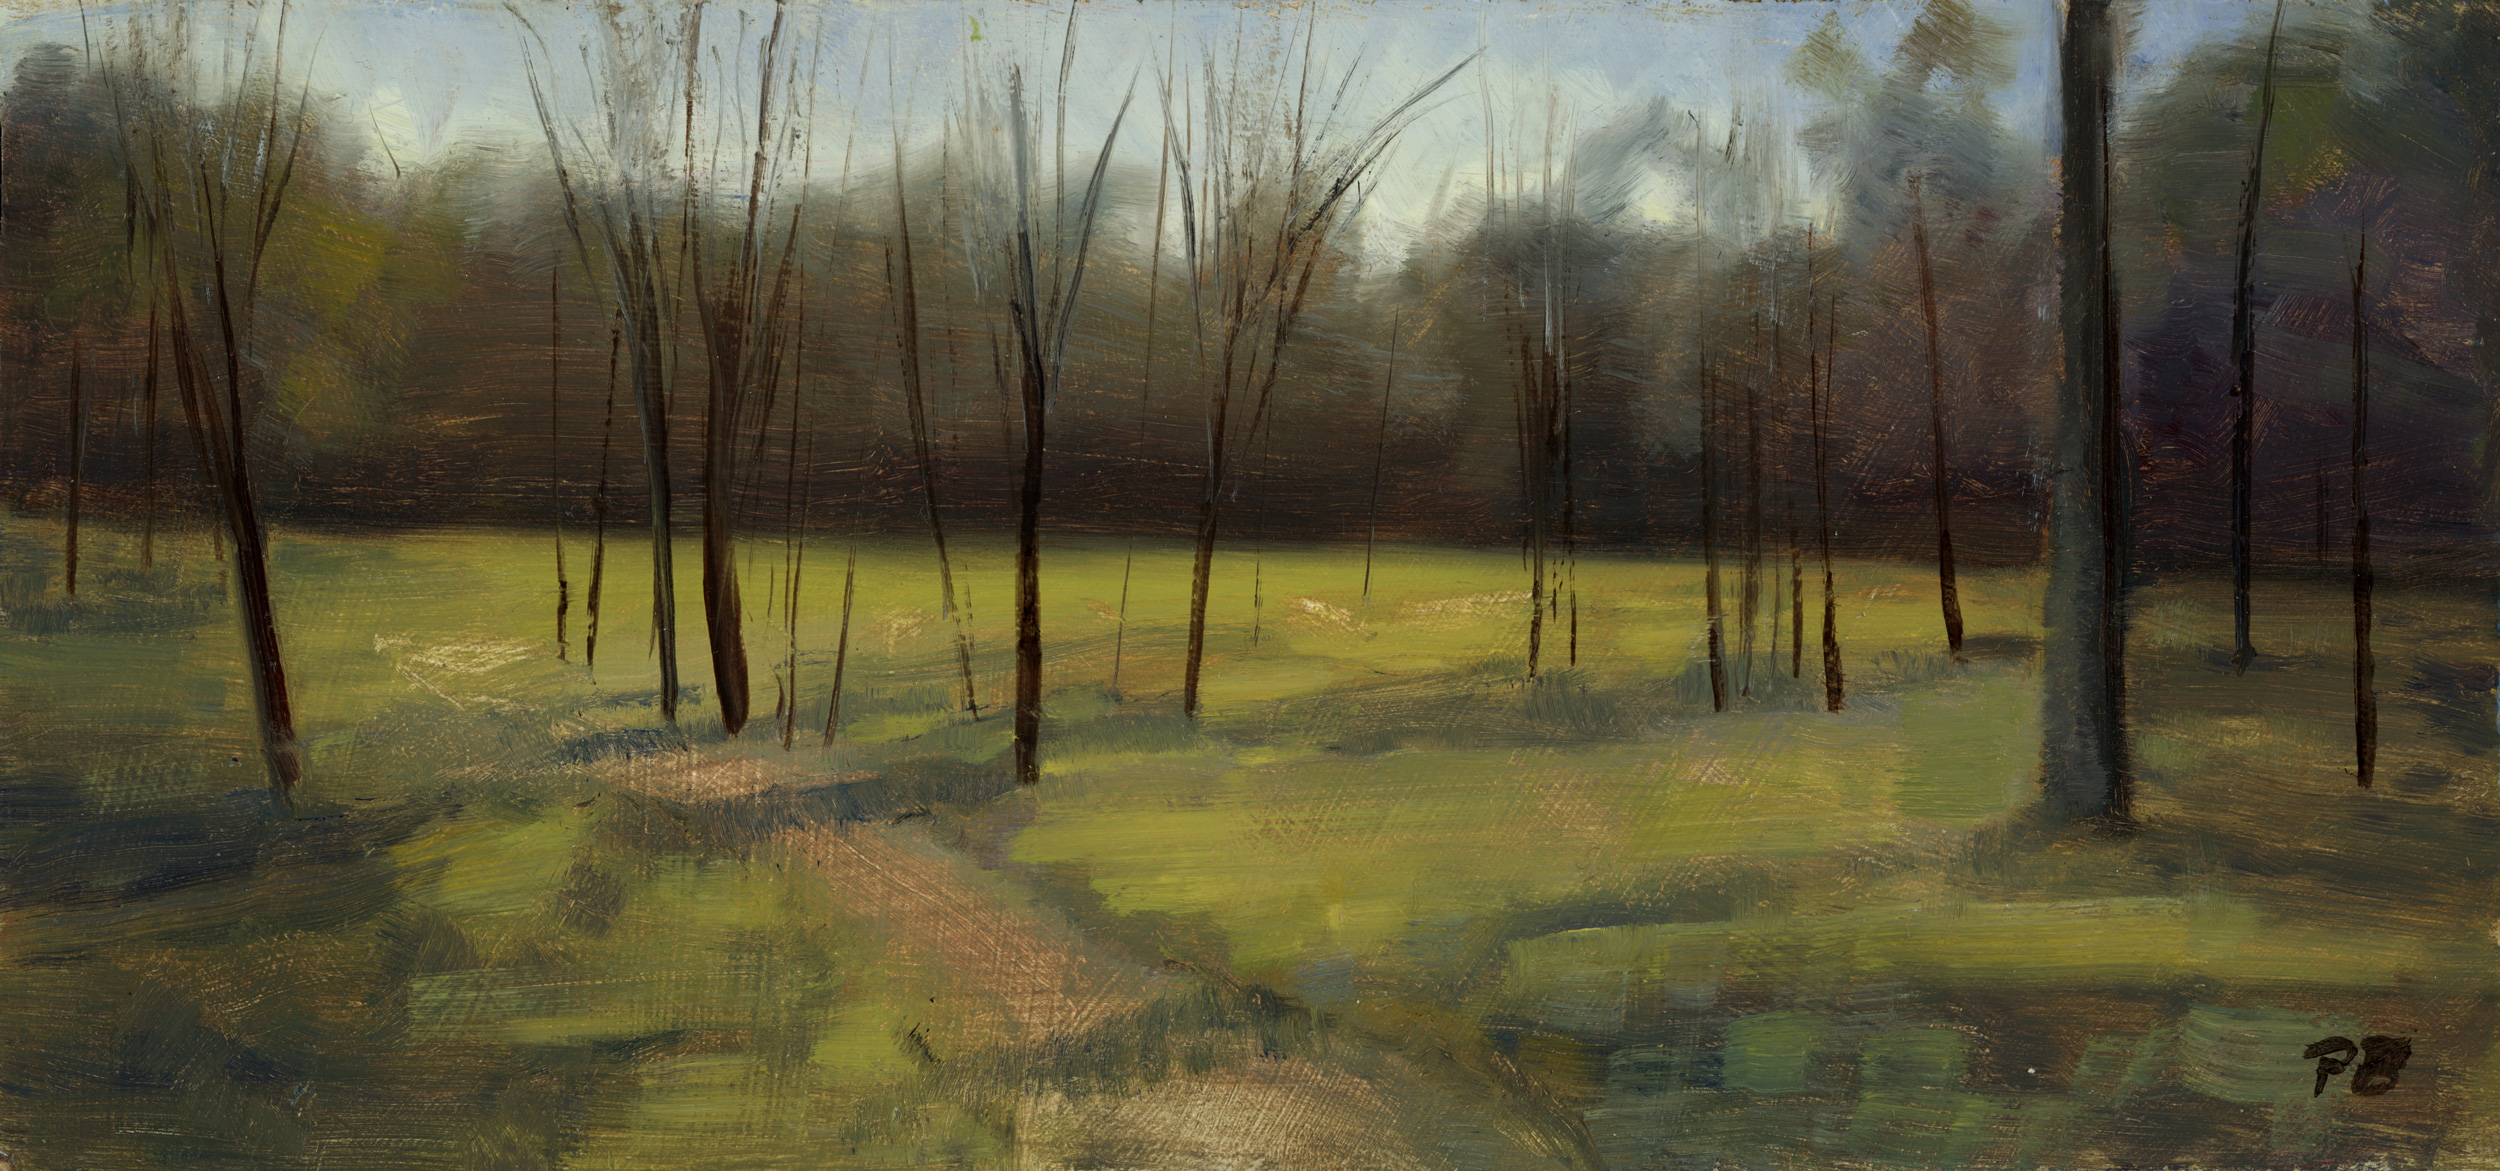 Peter Barker, Peaceful Forest Path, 138 x 295 mm, oil on board